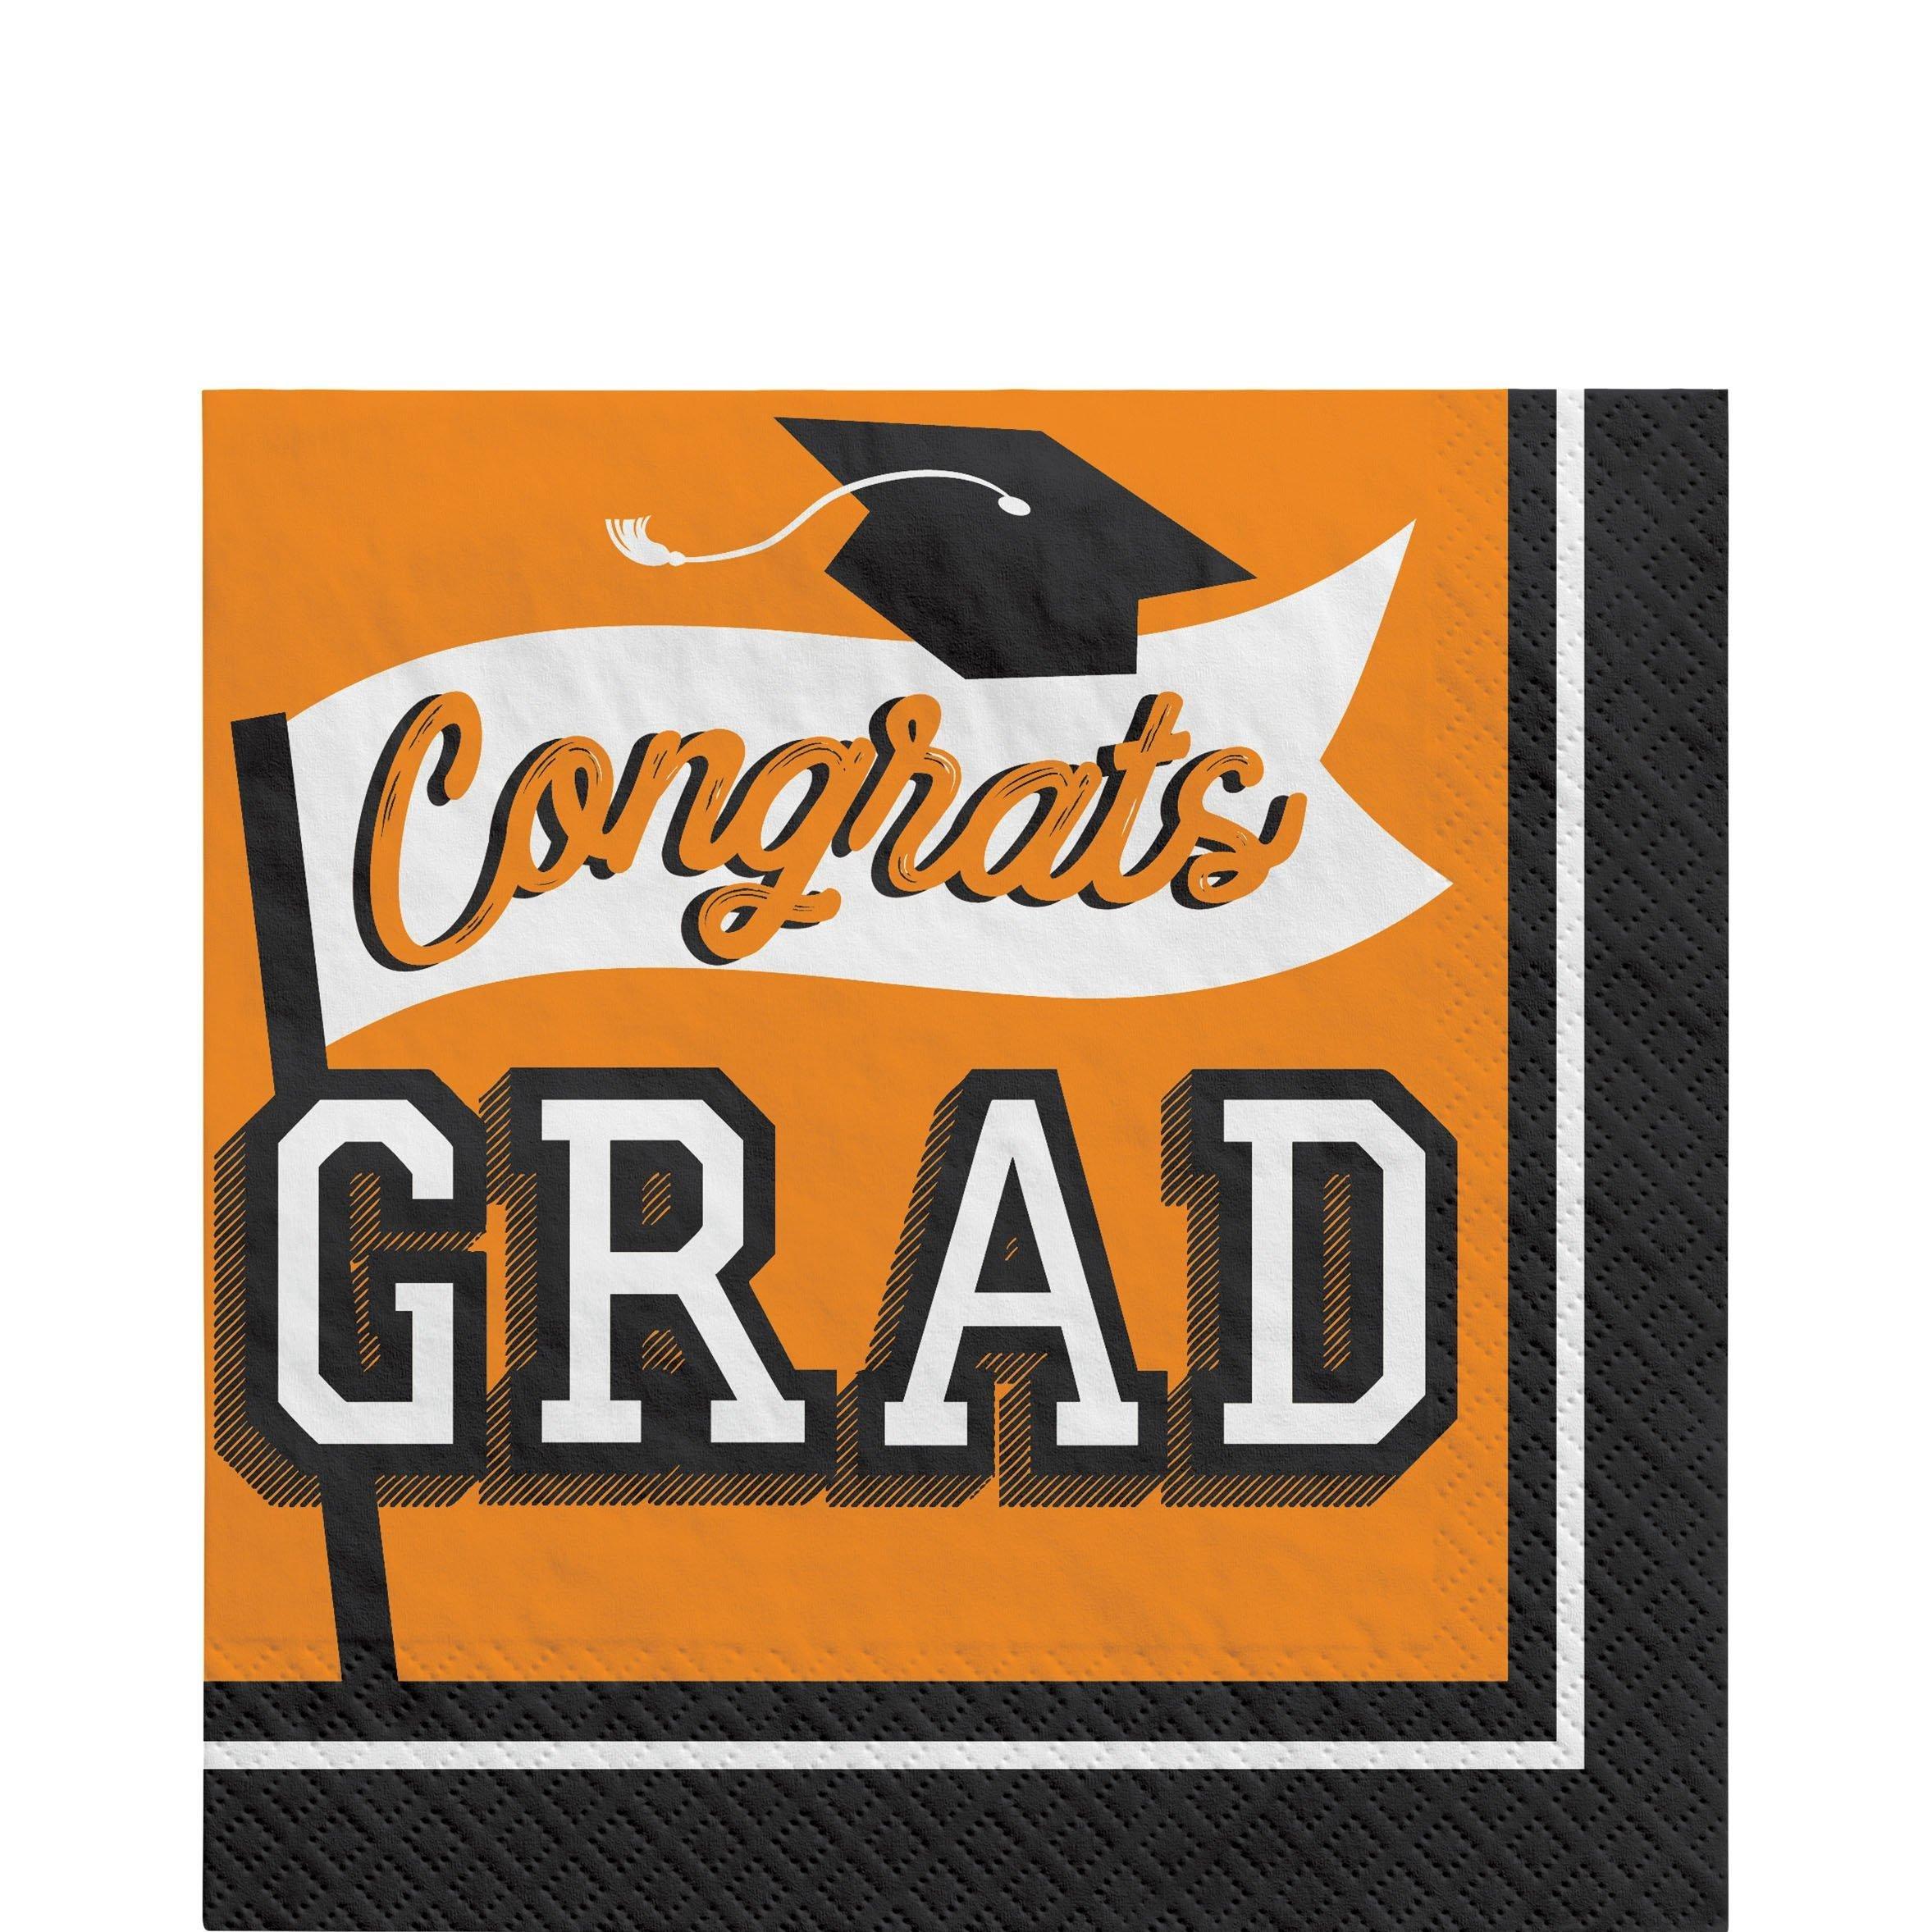 Graduation Party Supplies Kit for 40 with Decorations, Balloons, Plates, Napkins, Cups - Orange Congrats Grad